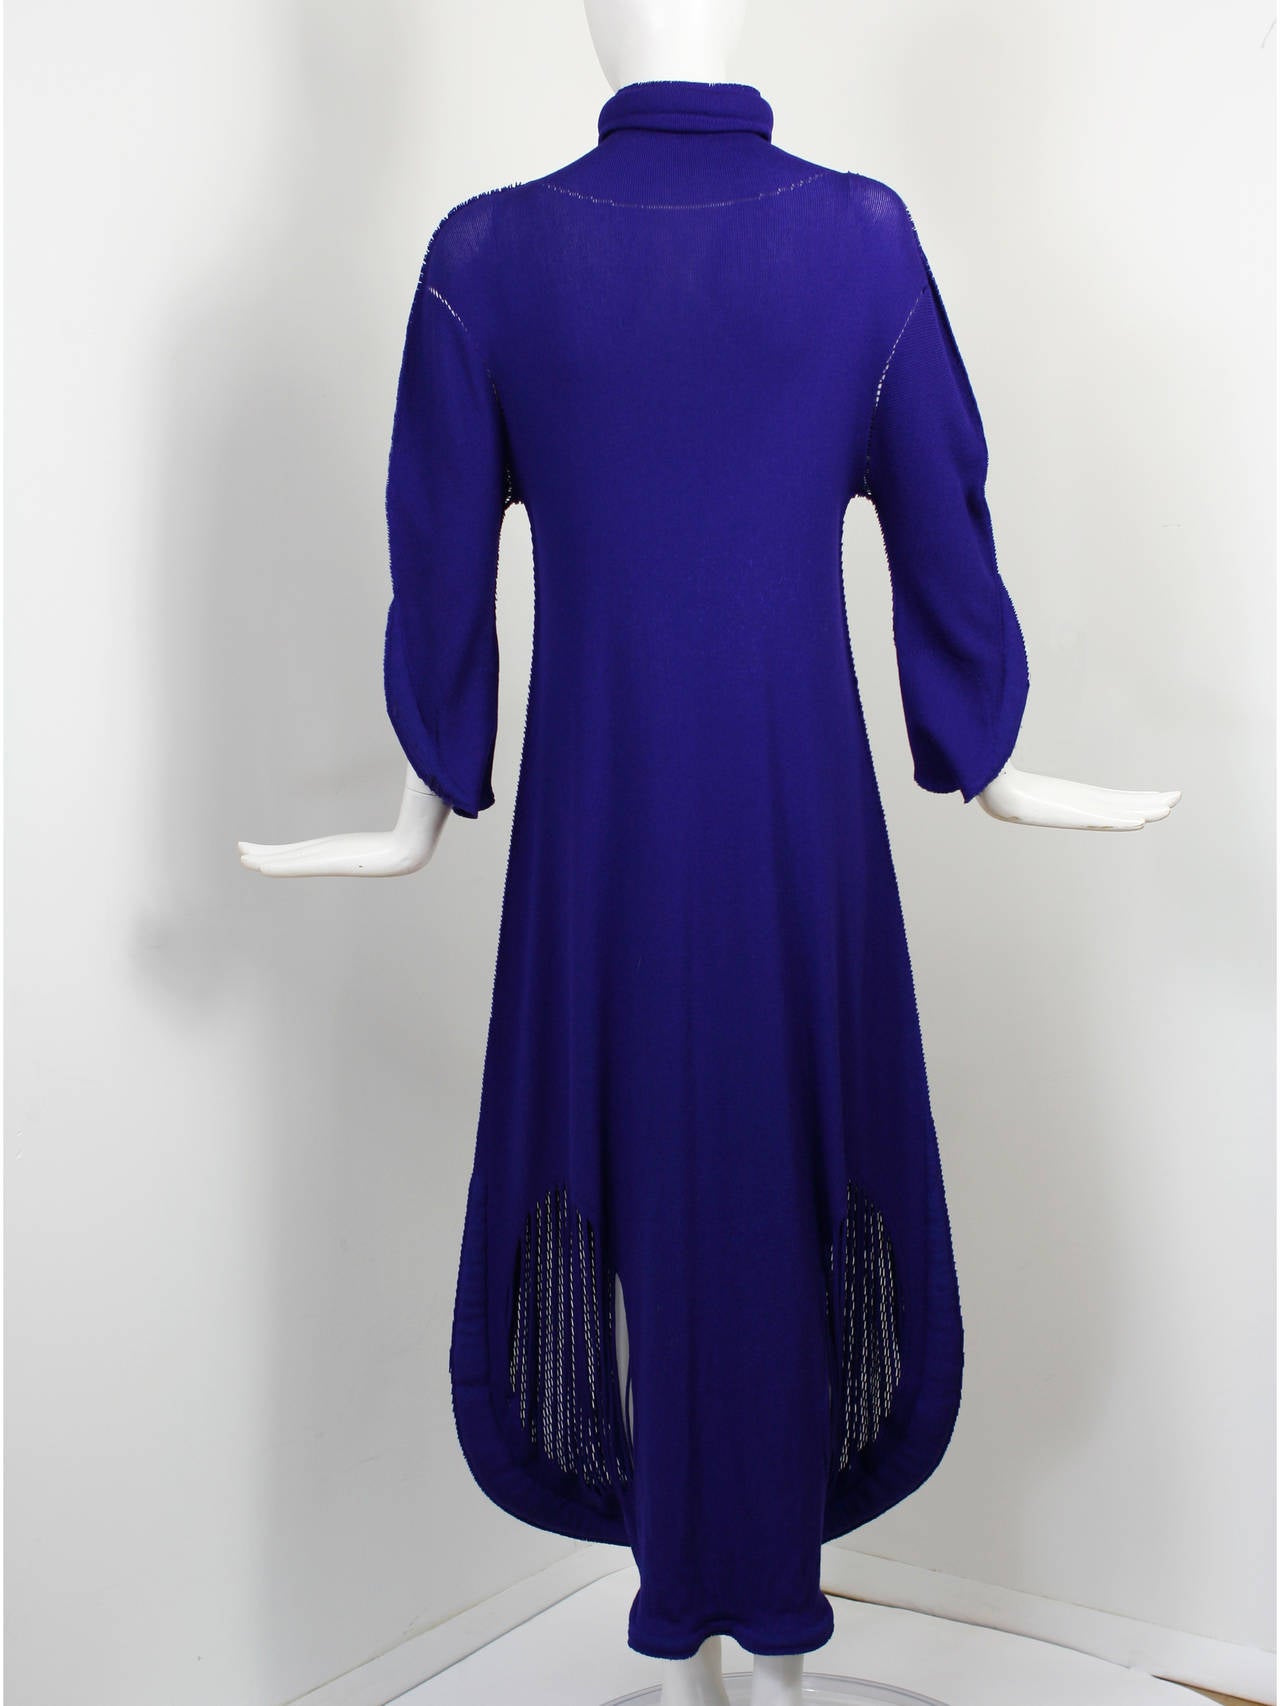 Rare Collectors A-POC Issey Miyake Purple Avant Garde Maxi Dress For Sale 5